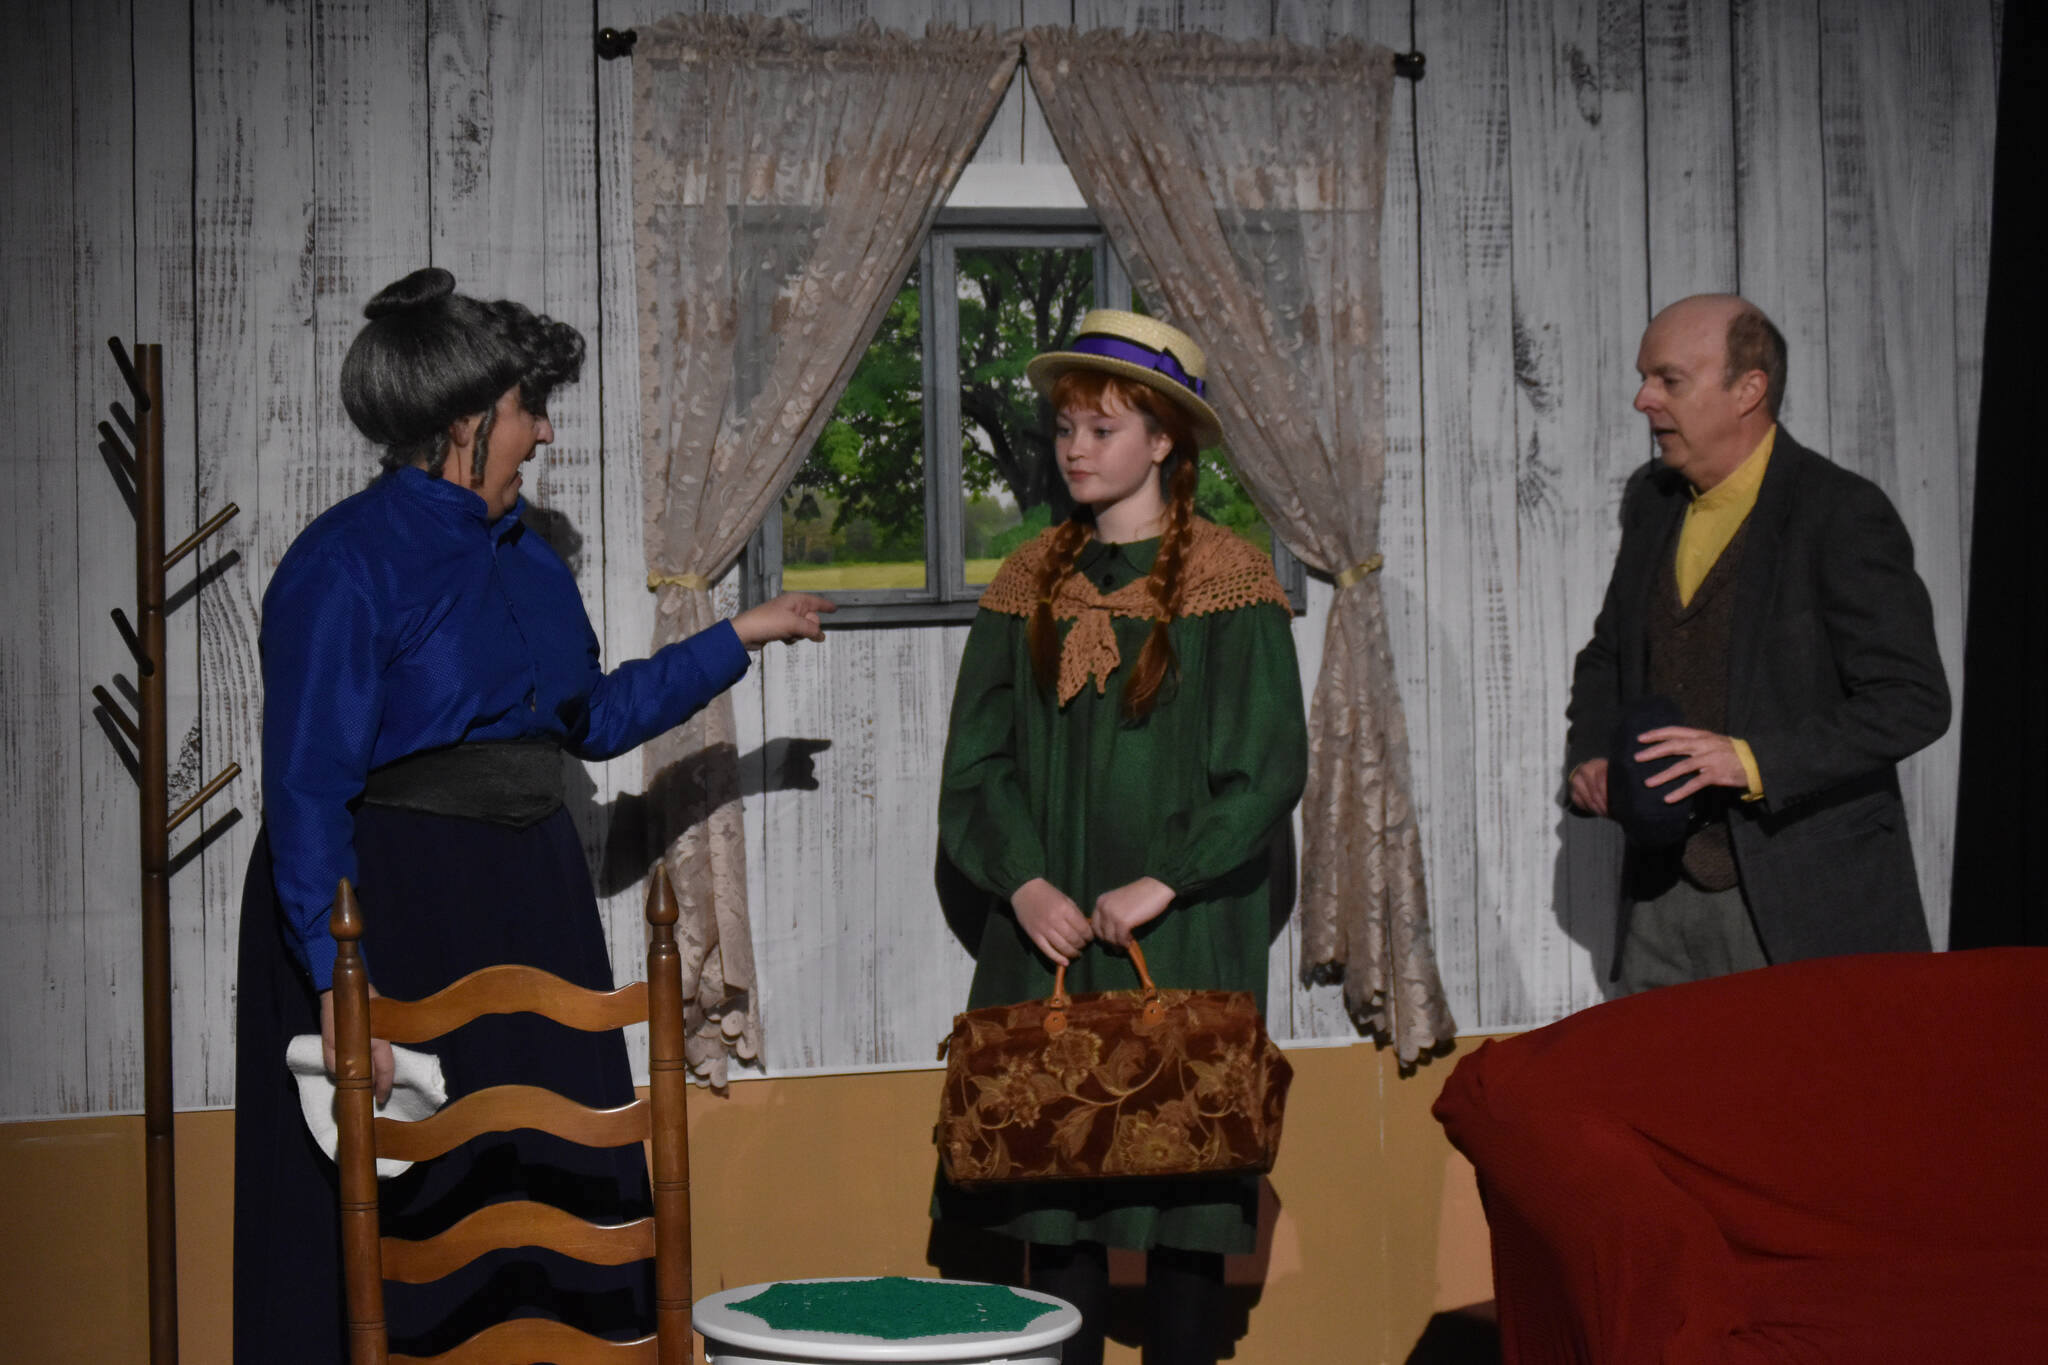 From left, Donna Shirnberg portrays Marilla Cuthbert, Truly Hondel portrays Anne Shirley, and Todd Sherwood portrays Matthew Cuthbert in a rehearsal of “Anne of Green Gables” at the Kenai Performers Black Box Theatre in Soldotna, Alaska, on Tuesday, Nov. 1, 2022. (Jake Dye/Peninsula Clarion)